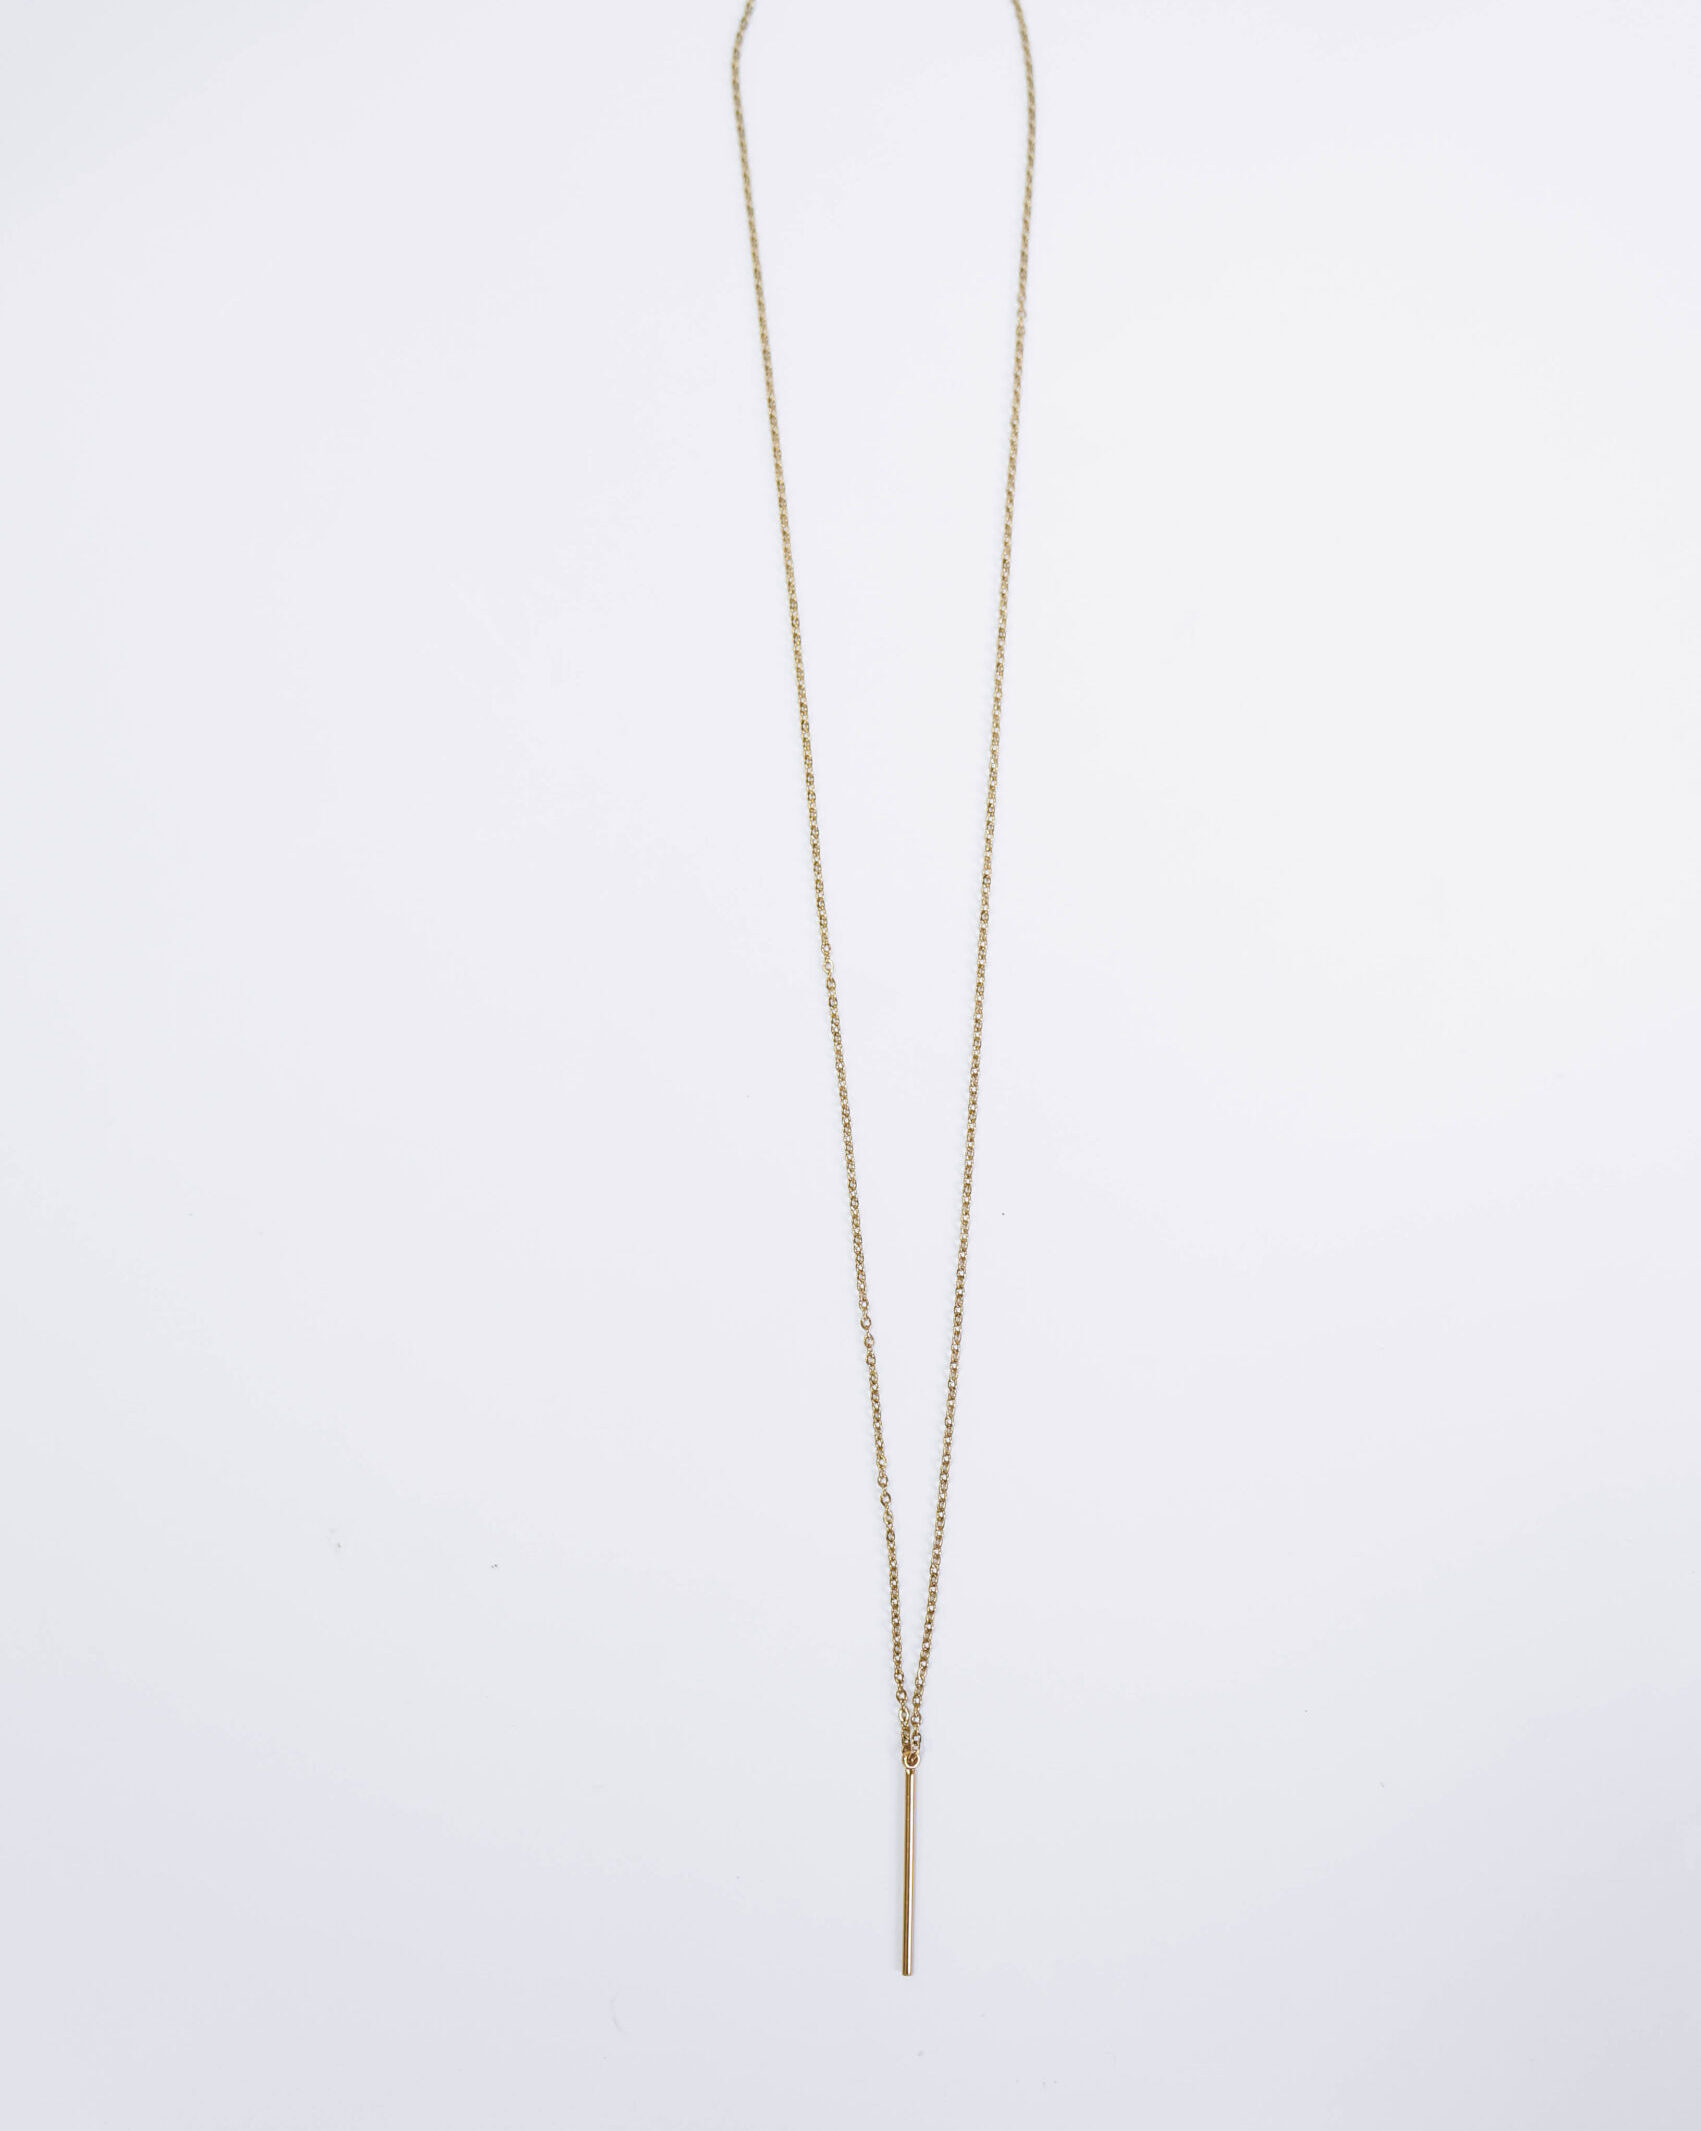 Unisex long chain necklace in gold